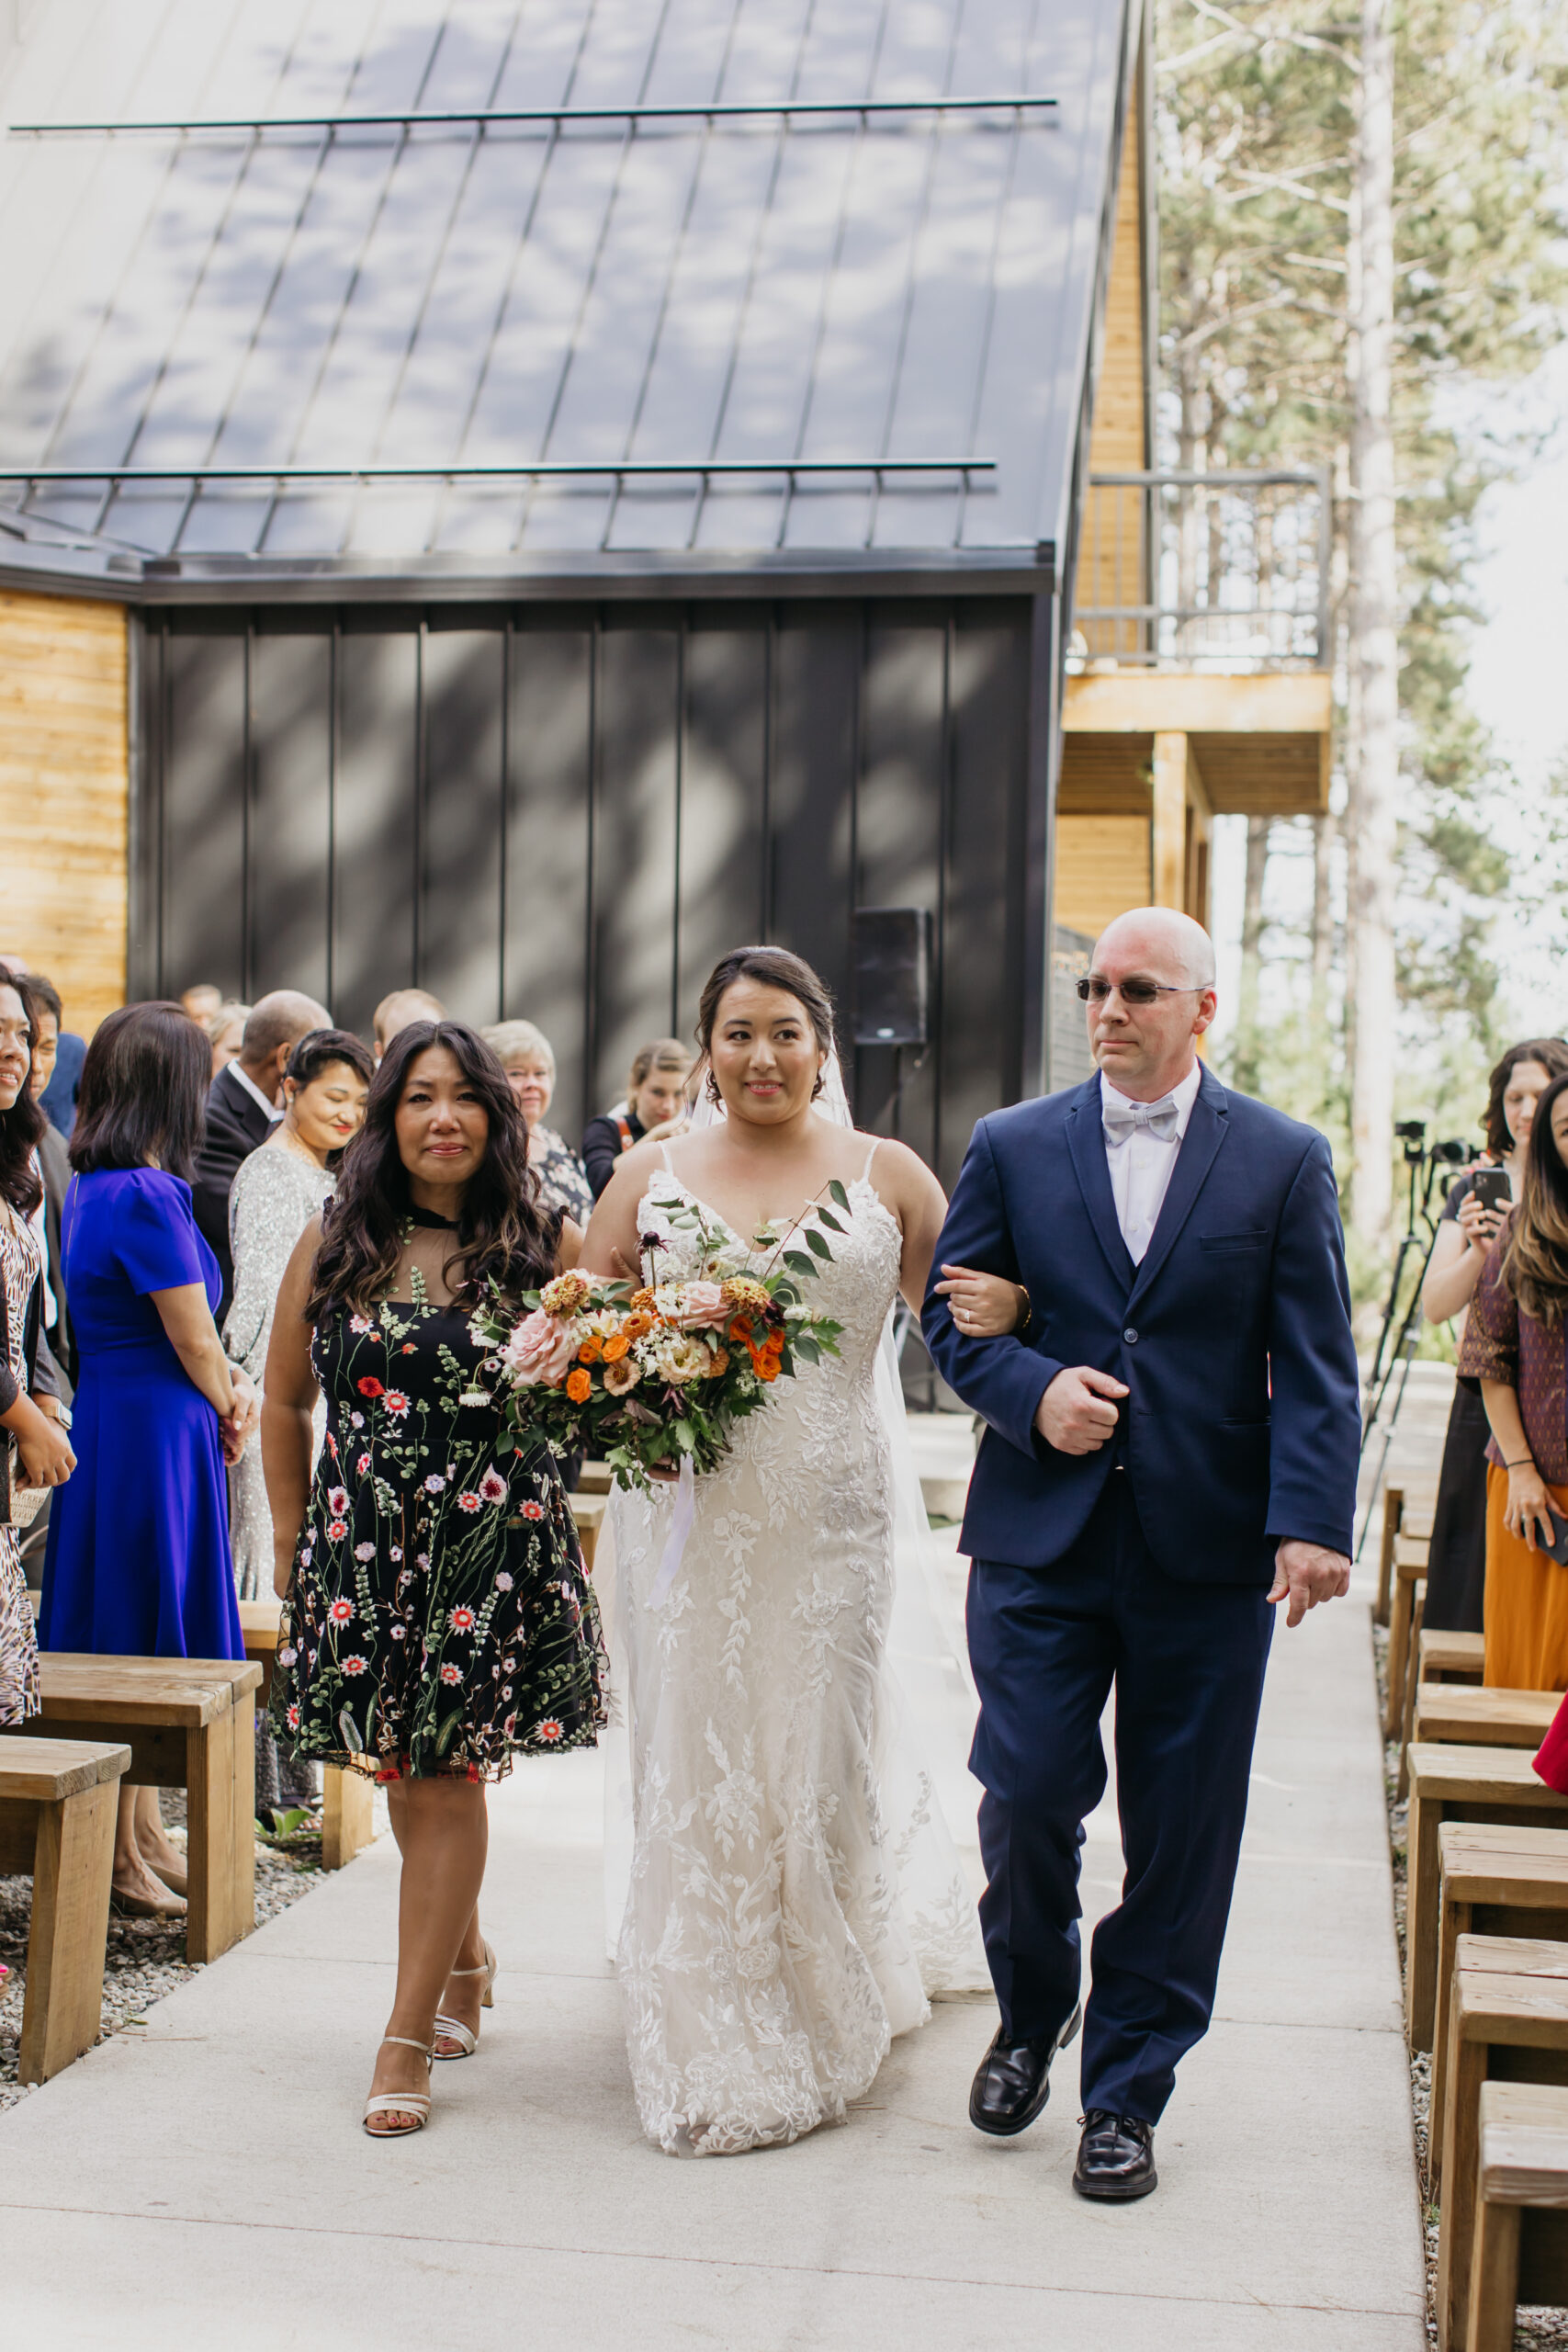 Photo of the bride and her parents walking her down the aisle